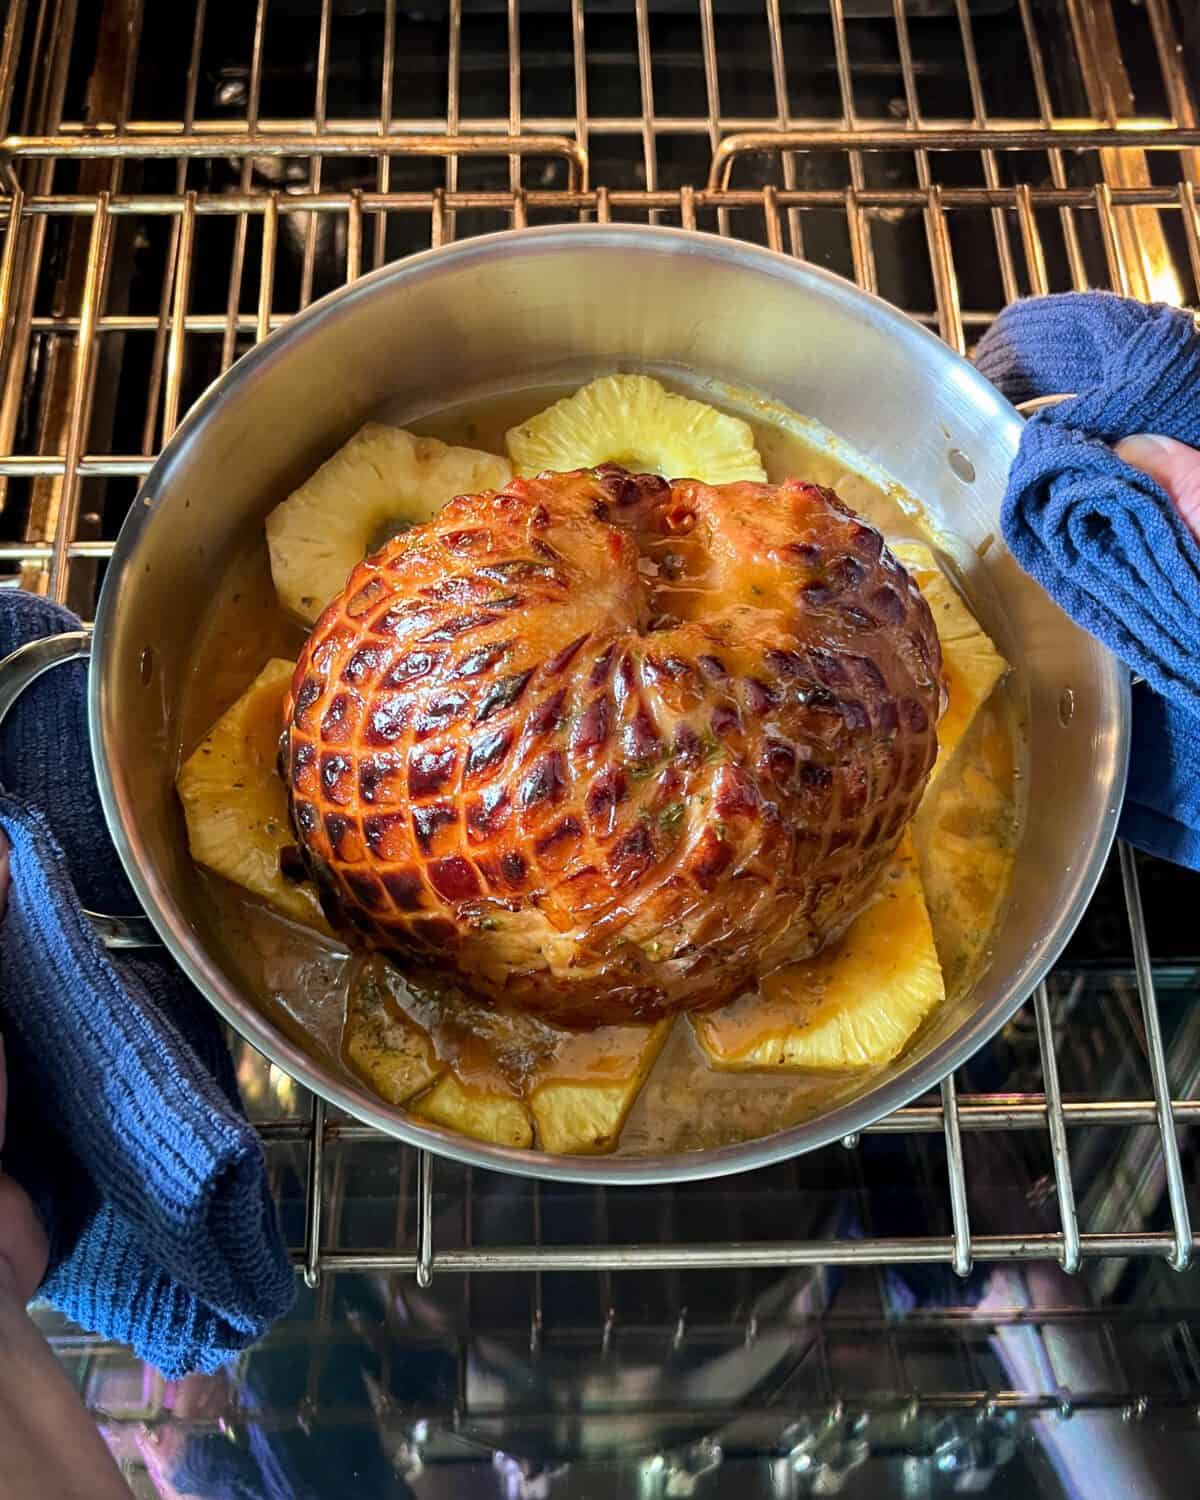 A glazed ham sitting on pineapple slices coming out of the oven.